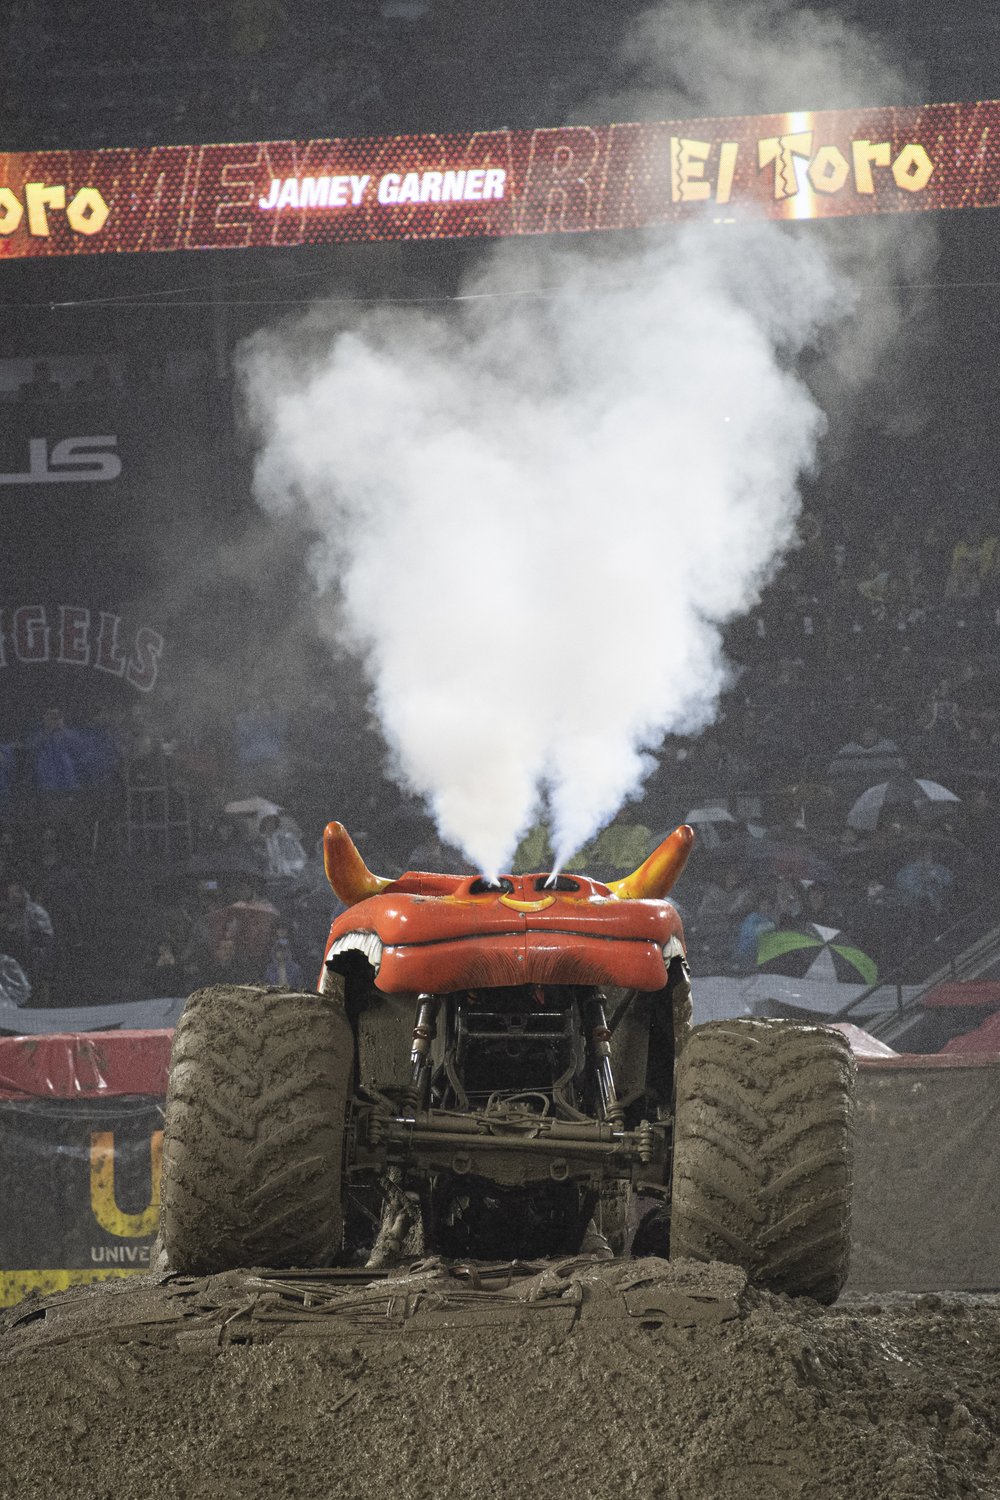 Monster Jam returns to Bakersfield for first time in two decades